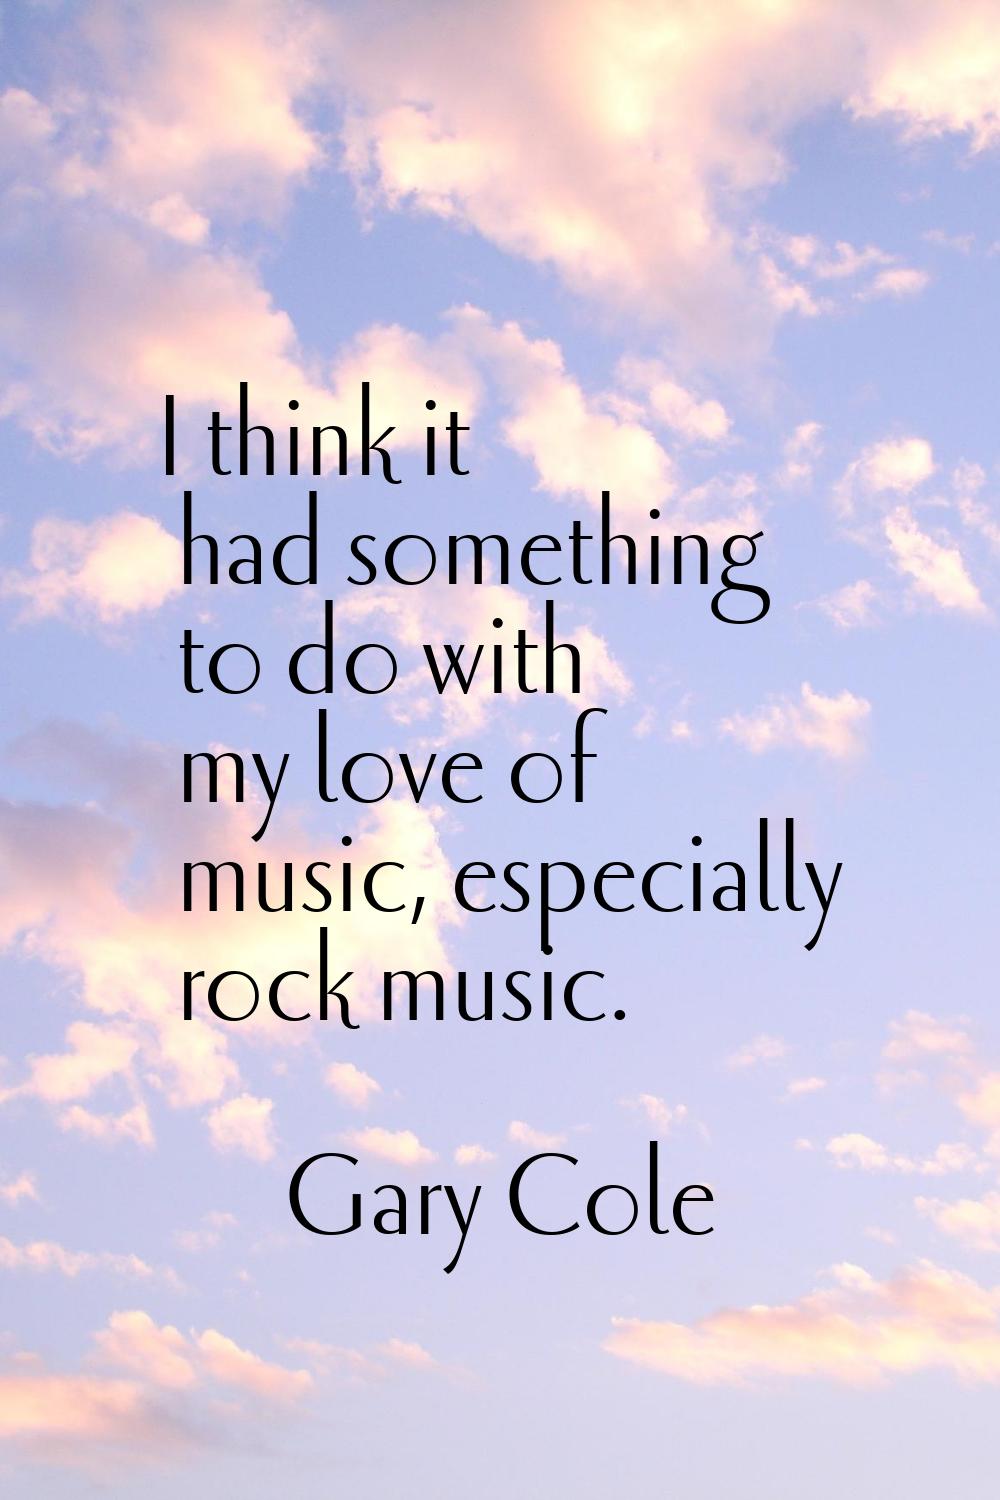 I think it had something to do with my love of music, especially rock music.